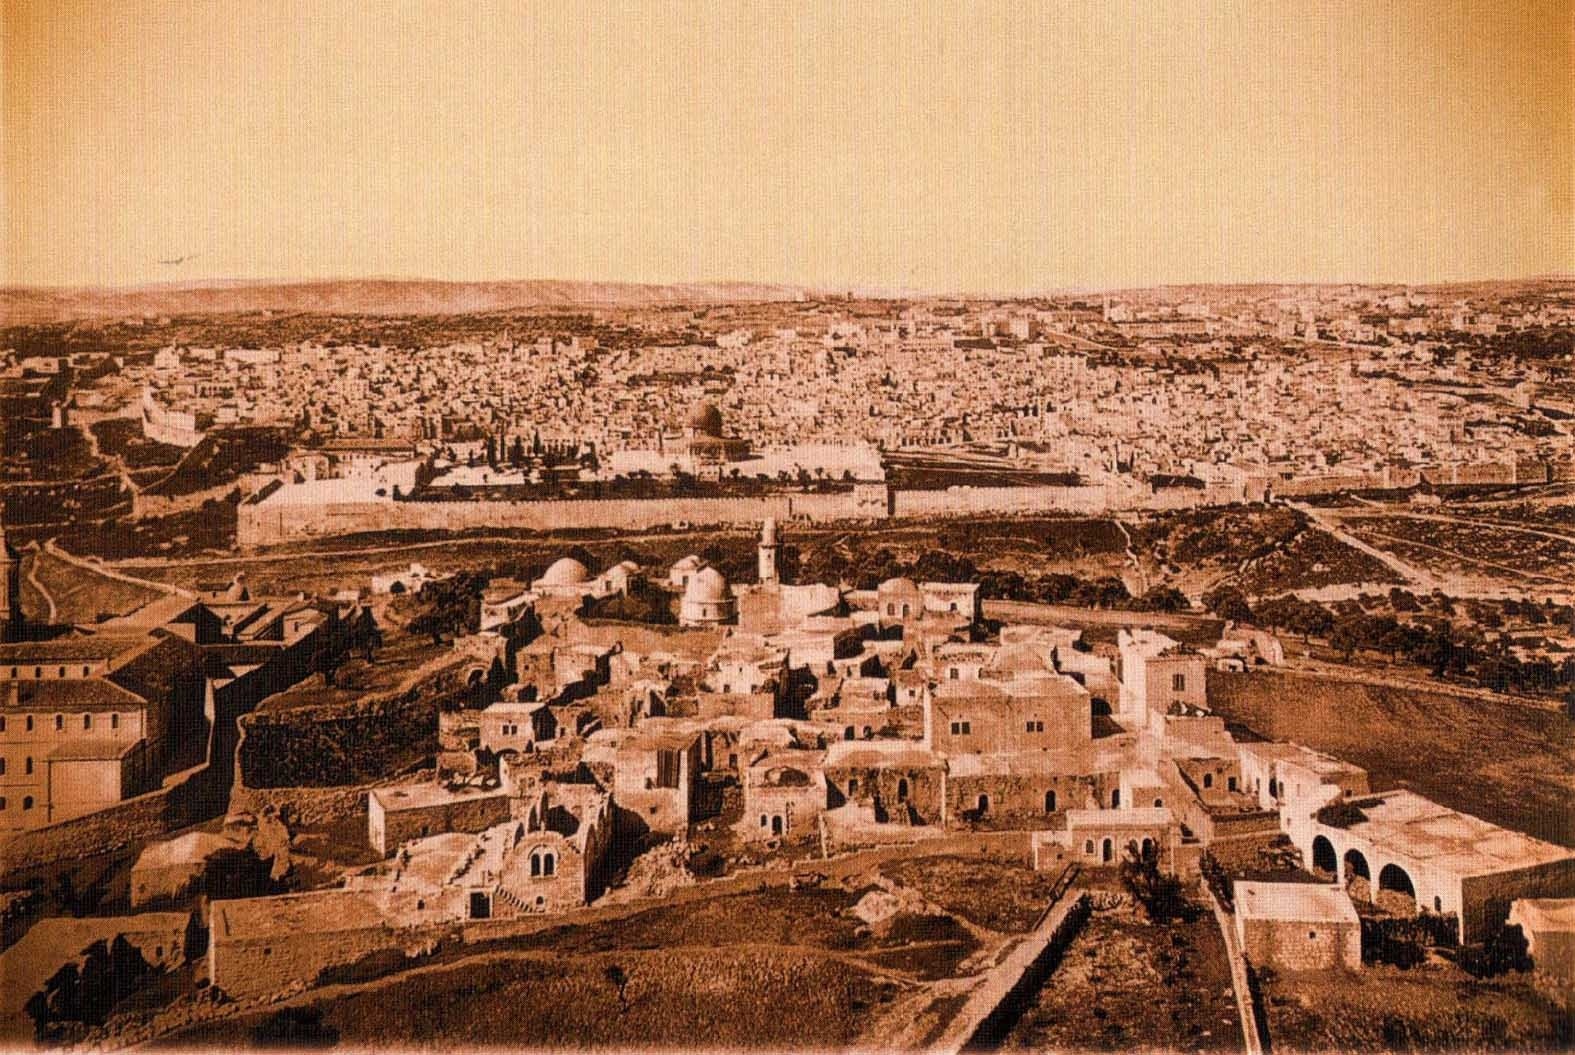 Jerusalem towards the end of the 19th century.